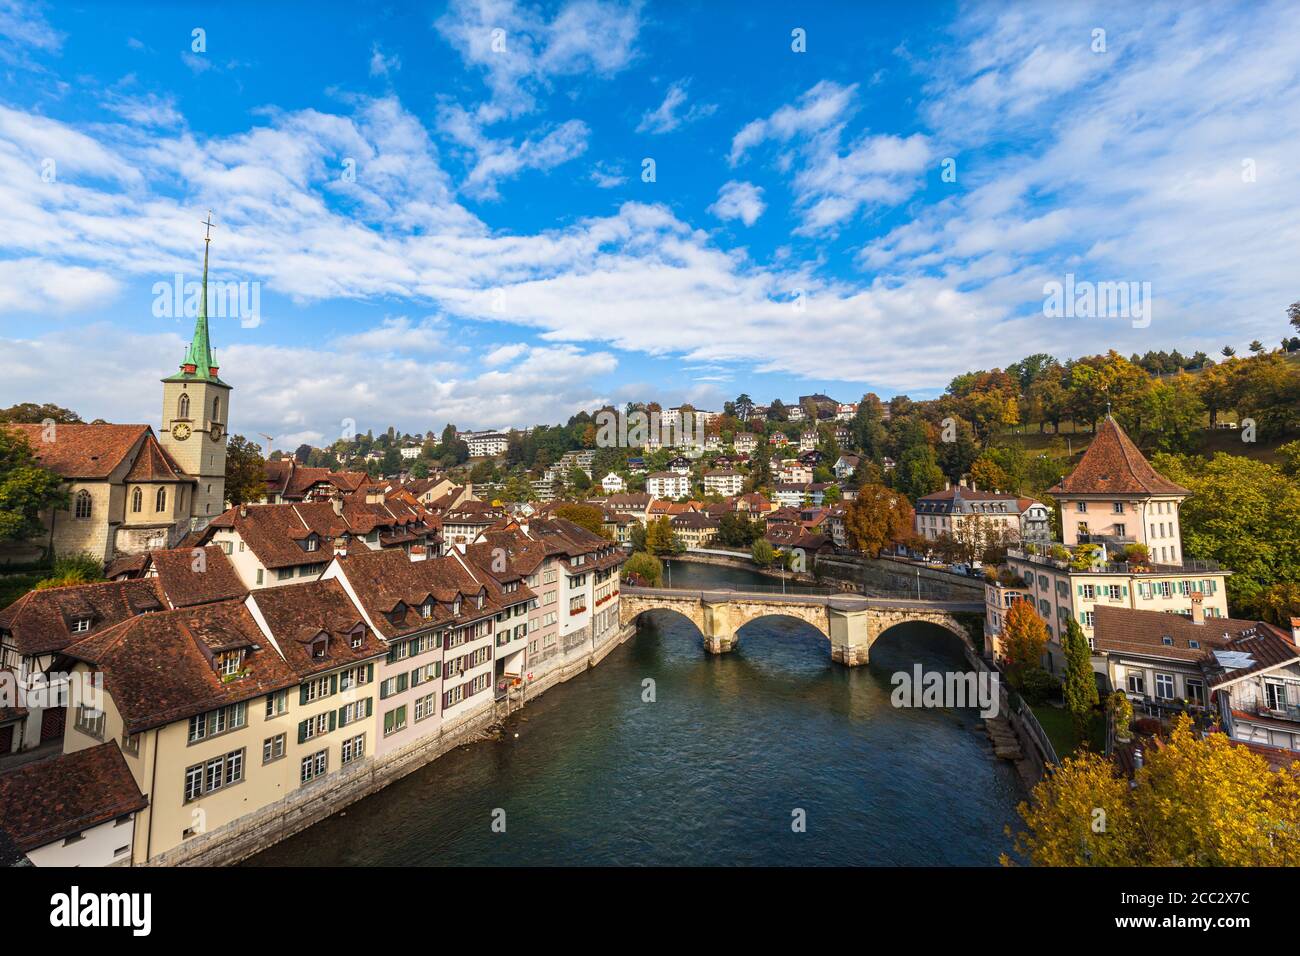 Beautiful view of Bern old town and Aare river from Nydeggbrücke bridge with Nydeggkirche church and Untertorbrücke, on sunny autumn day with blue sky Stock Photo